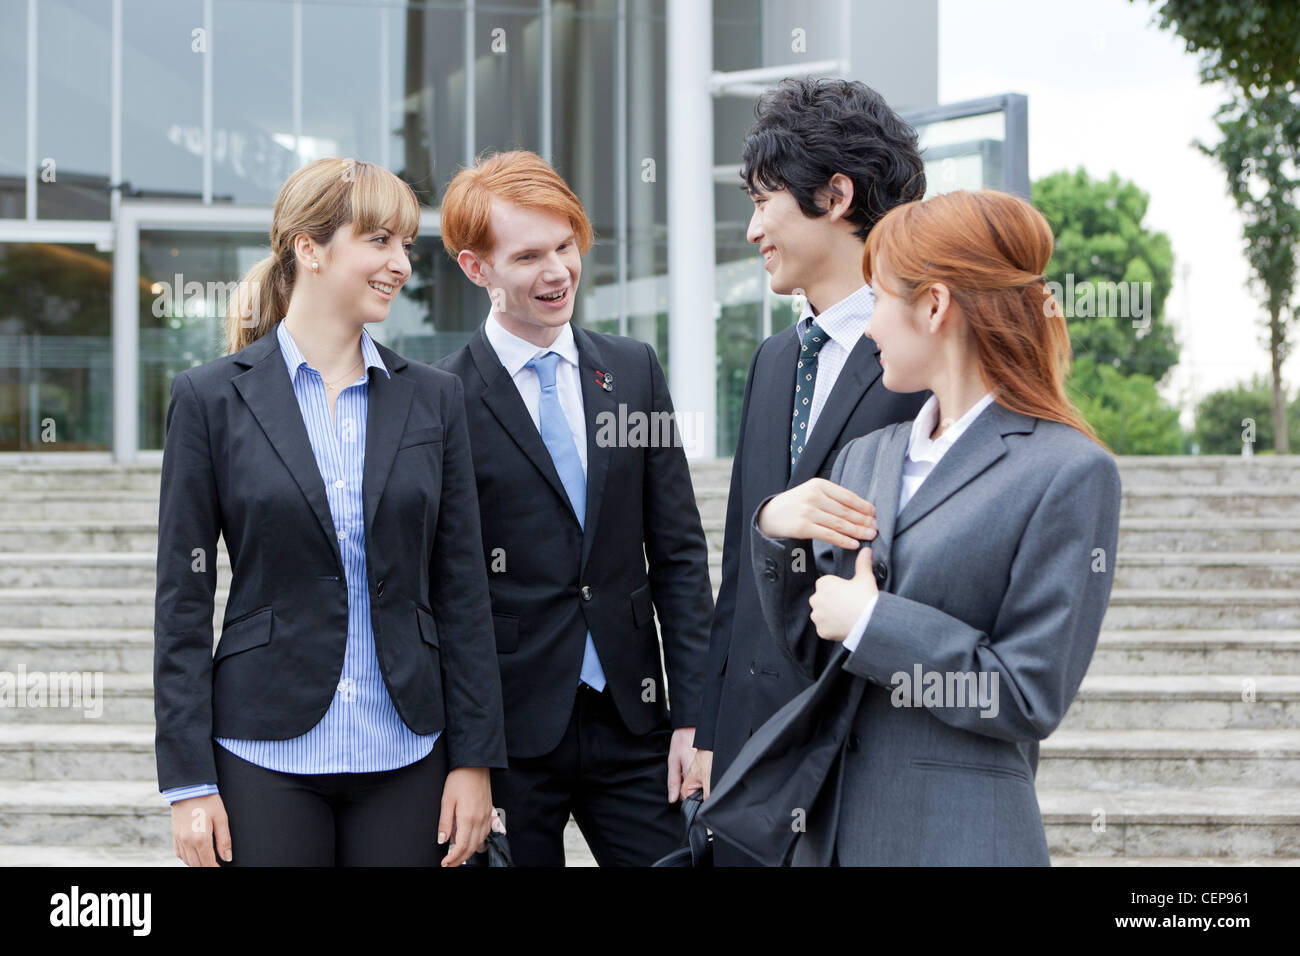 Businessmen and businesswomen talking in front of building Stock Photo